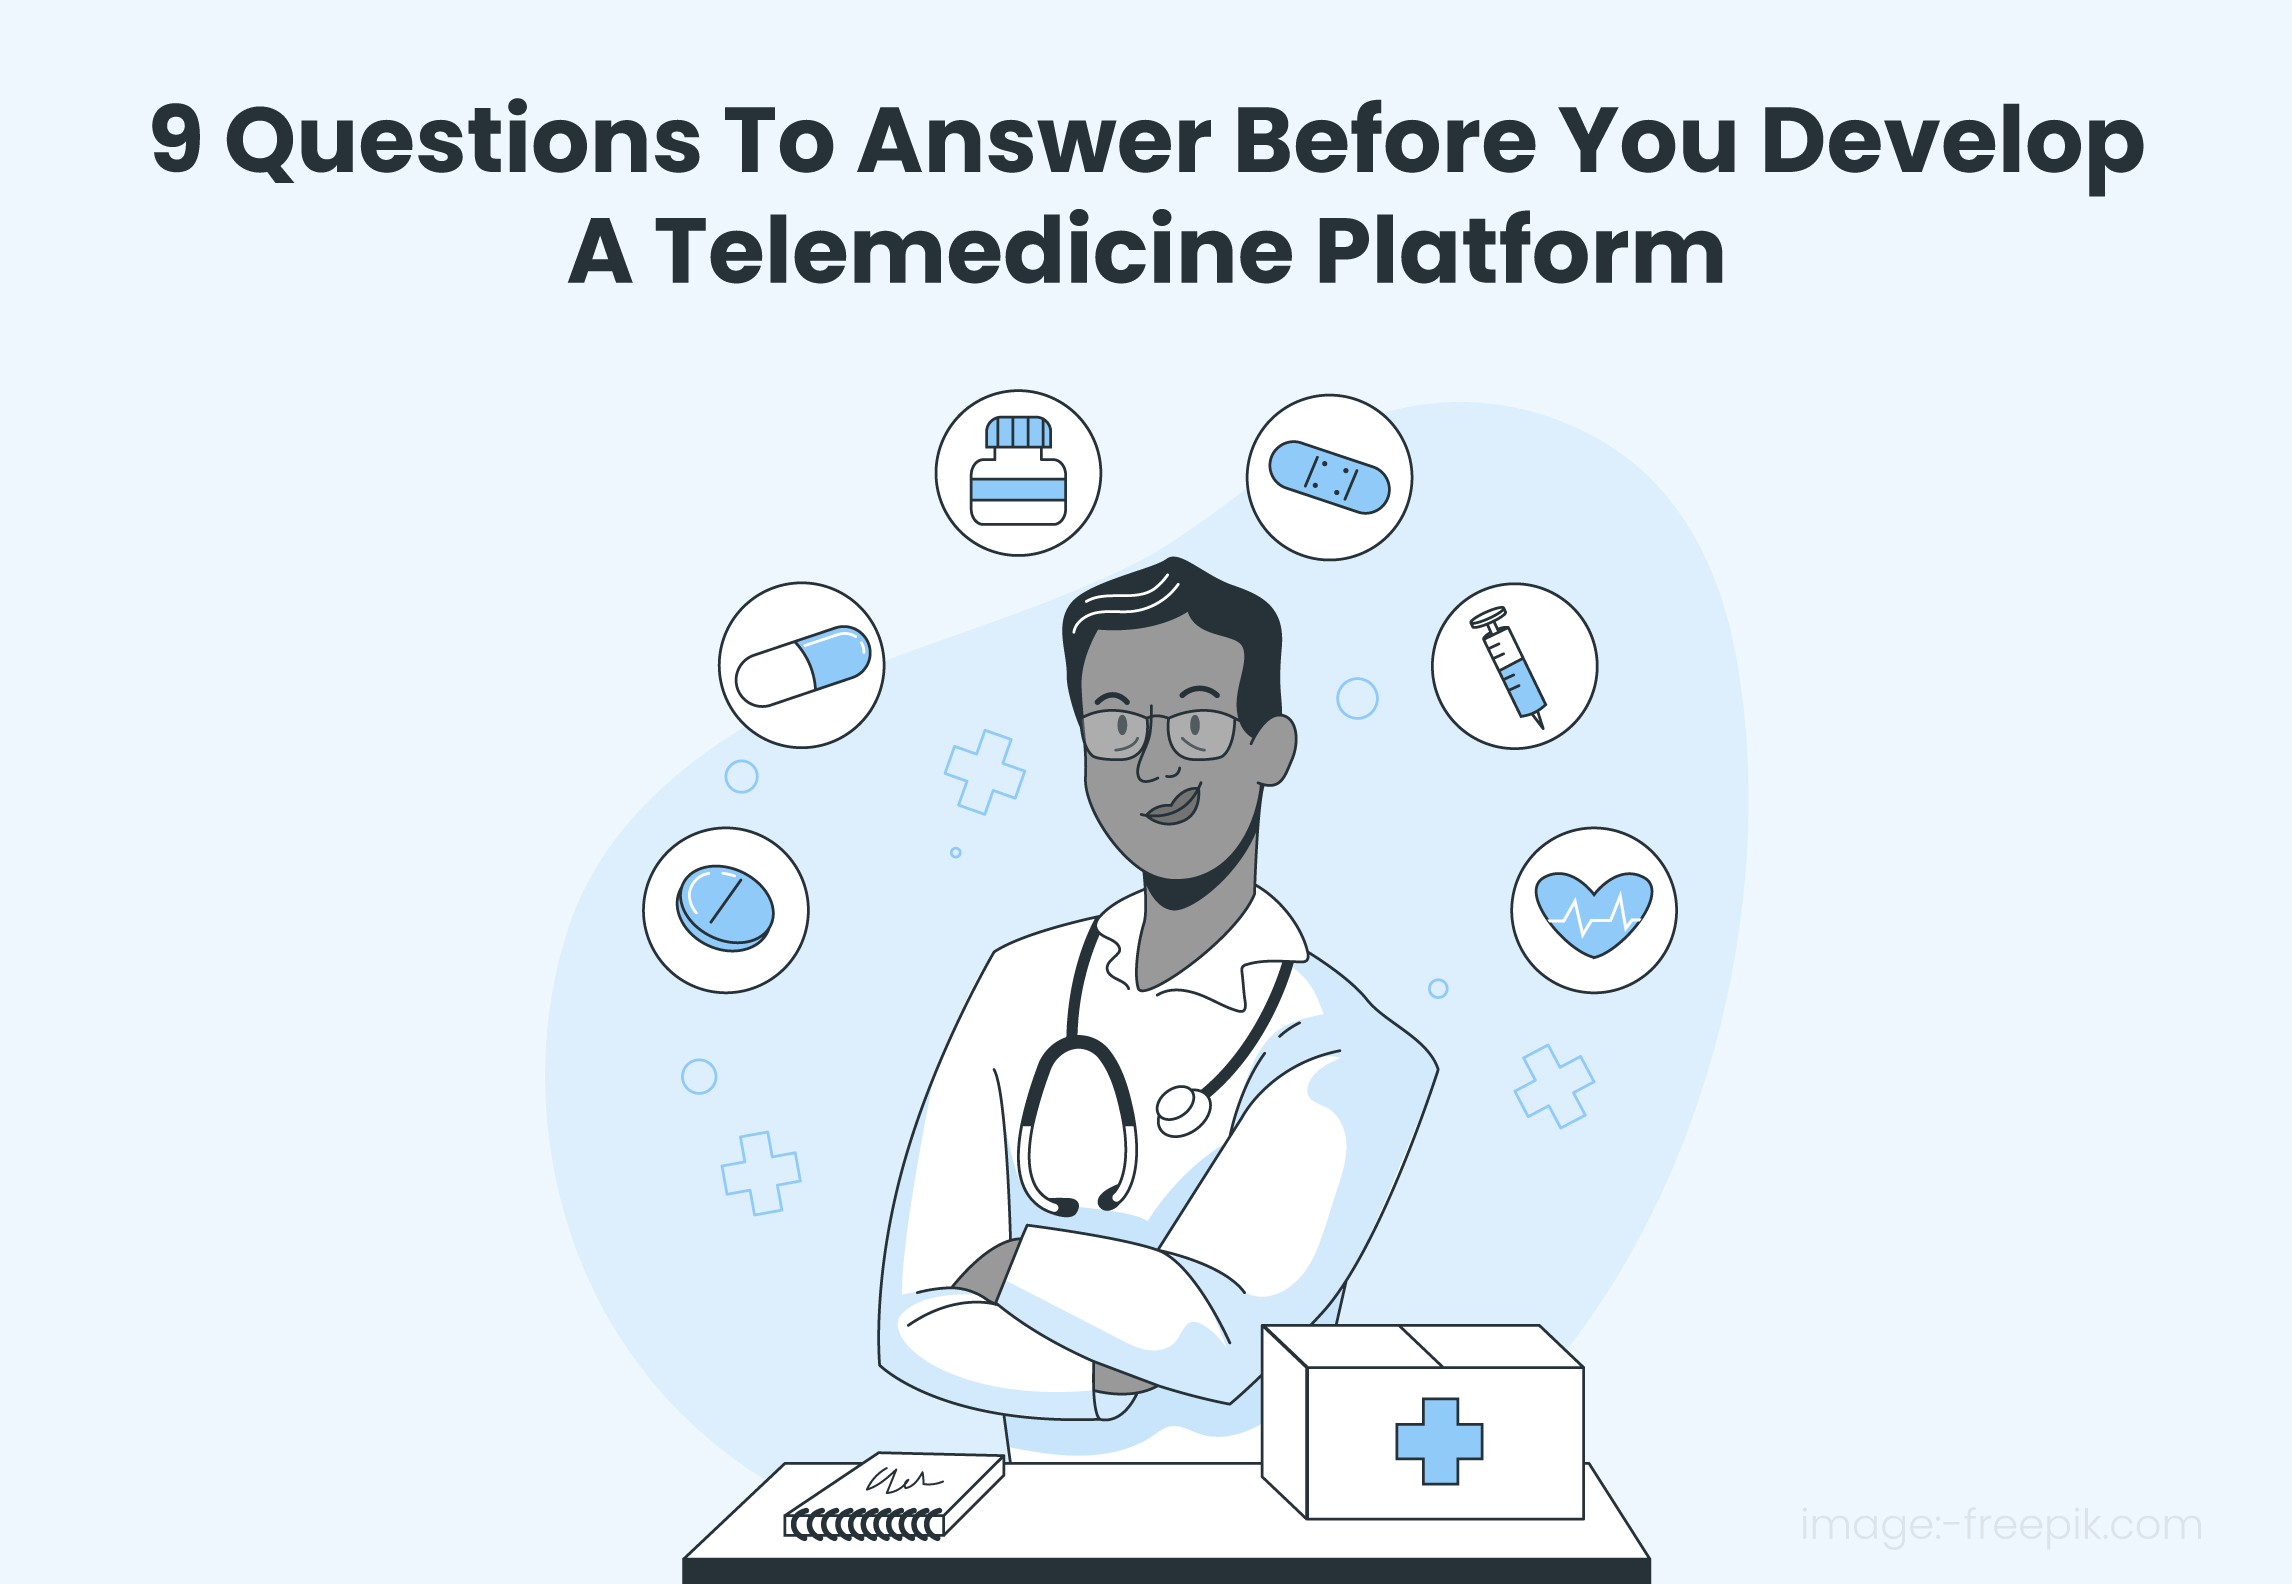 9 Questions To Answer Before You Develop A Telemedicine Platform